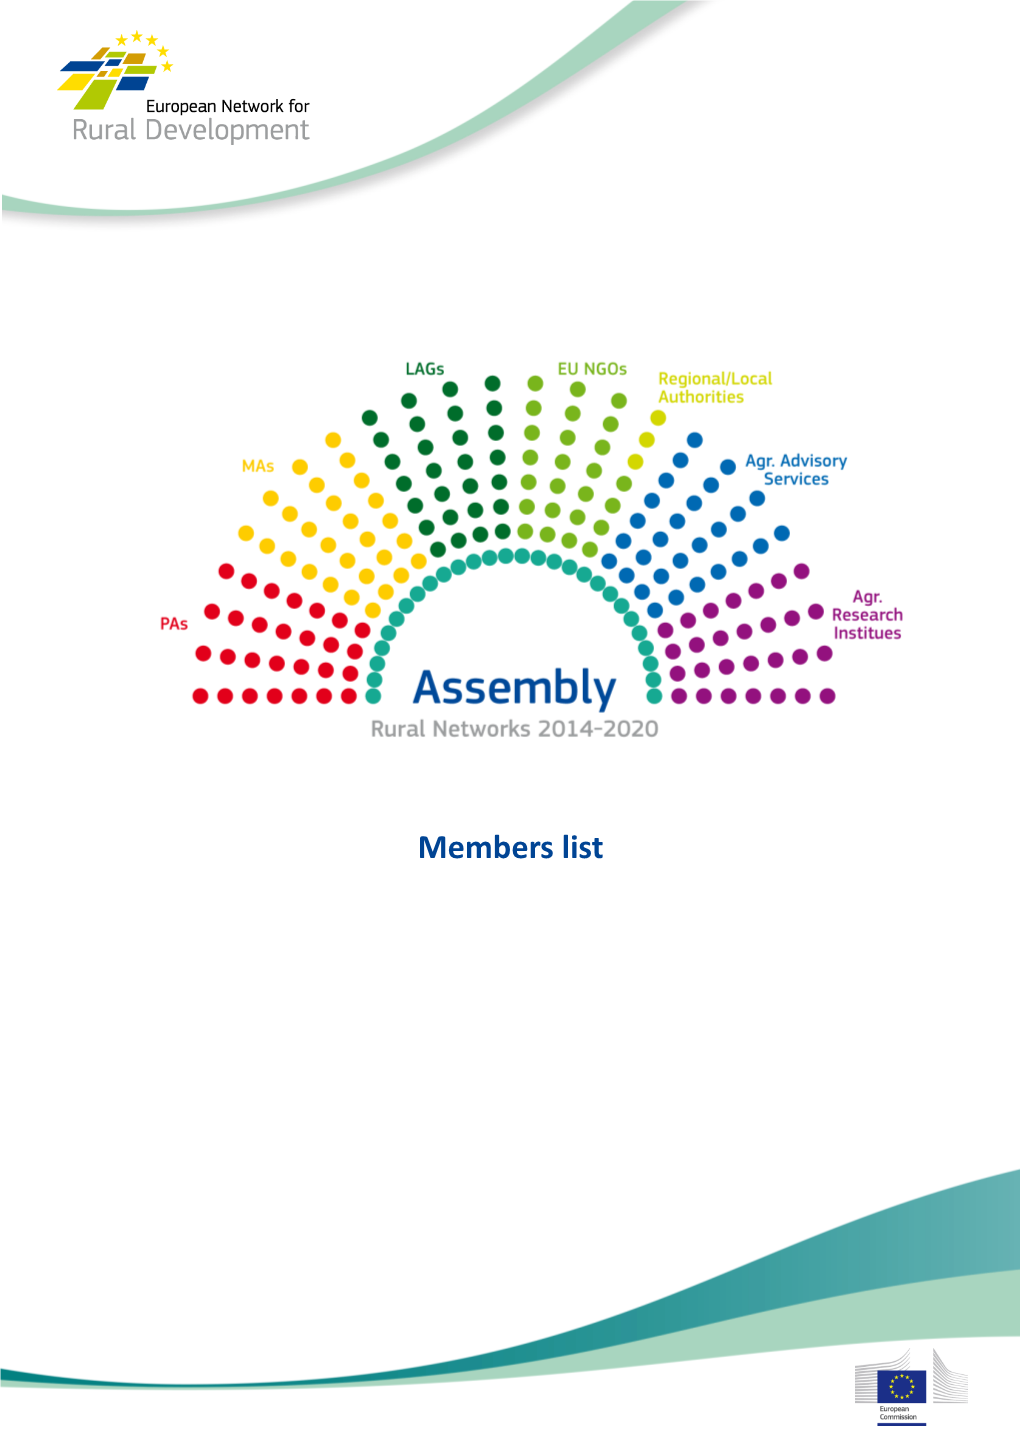 List of Assembly Members